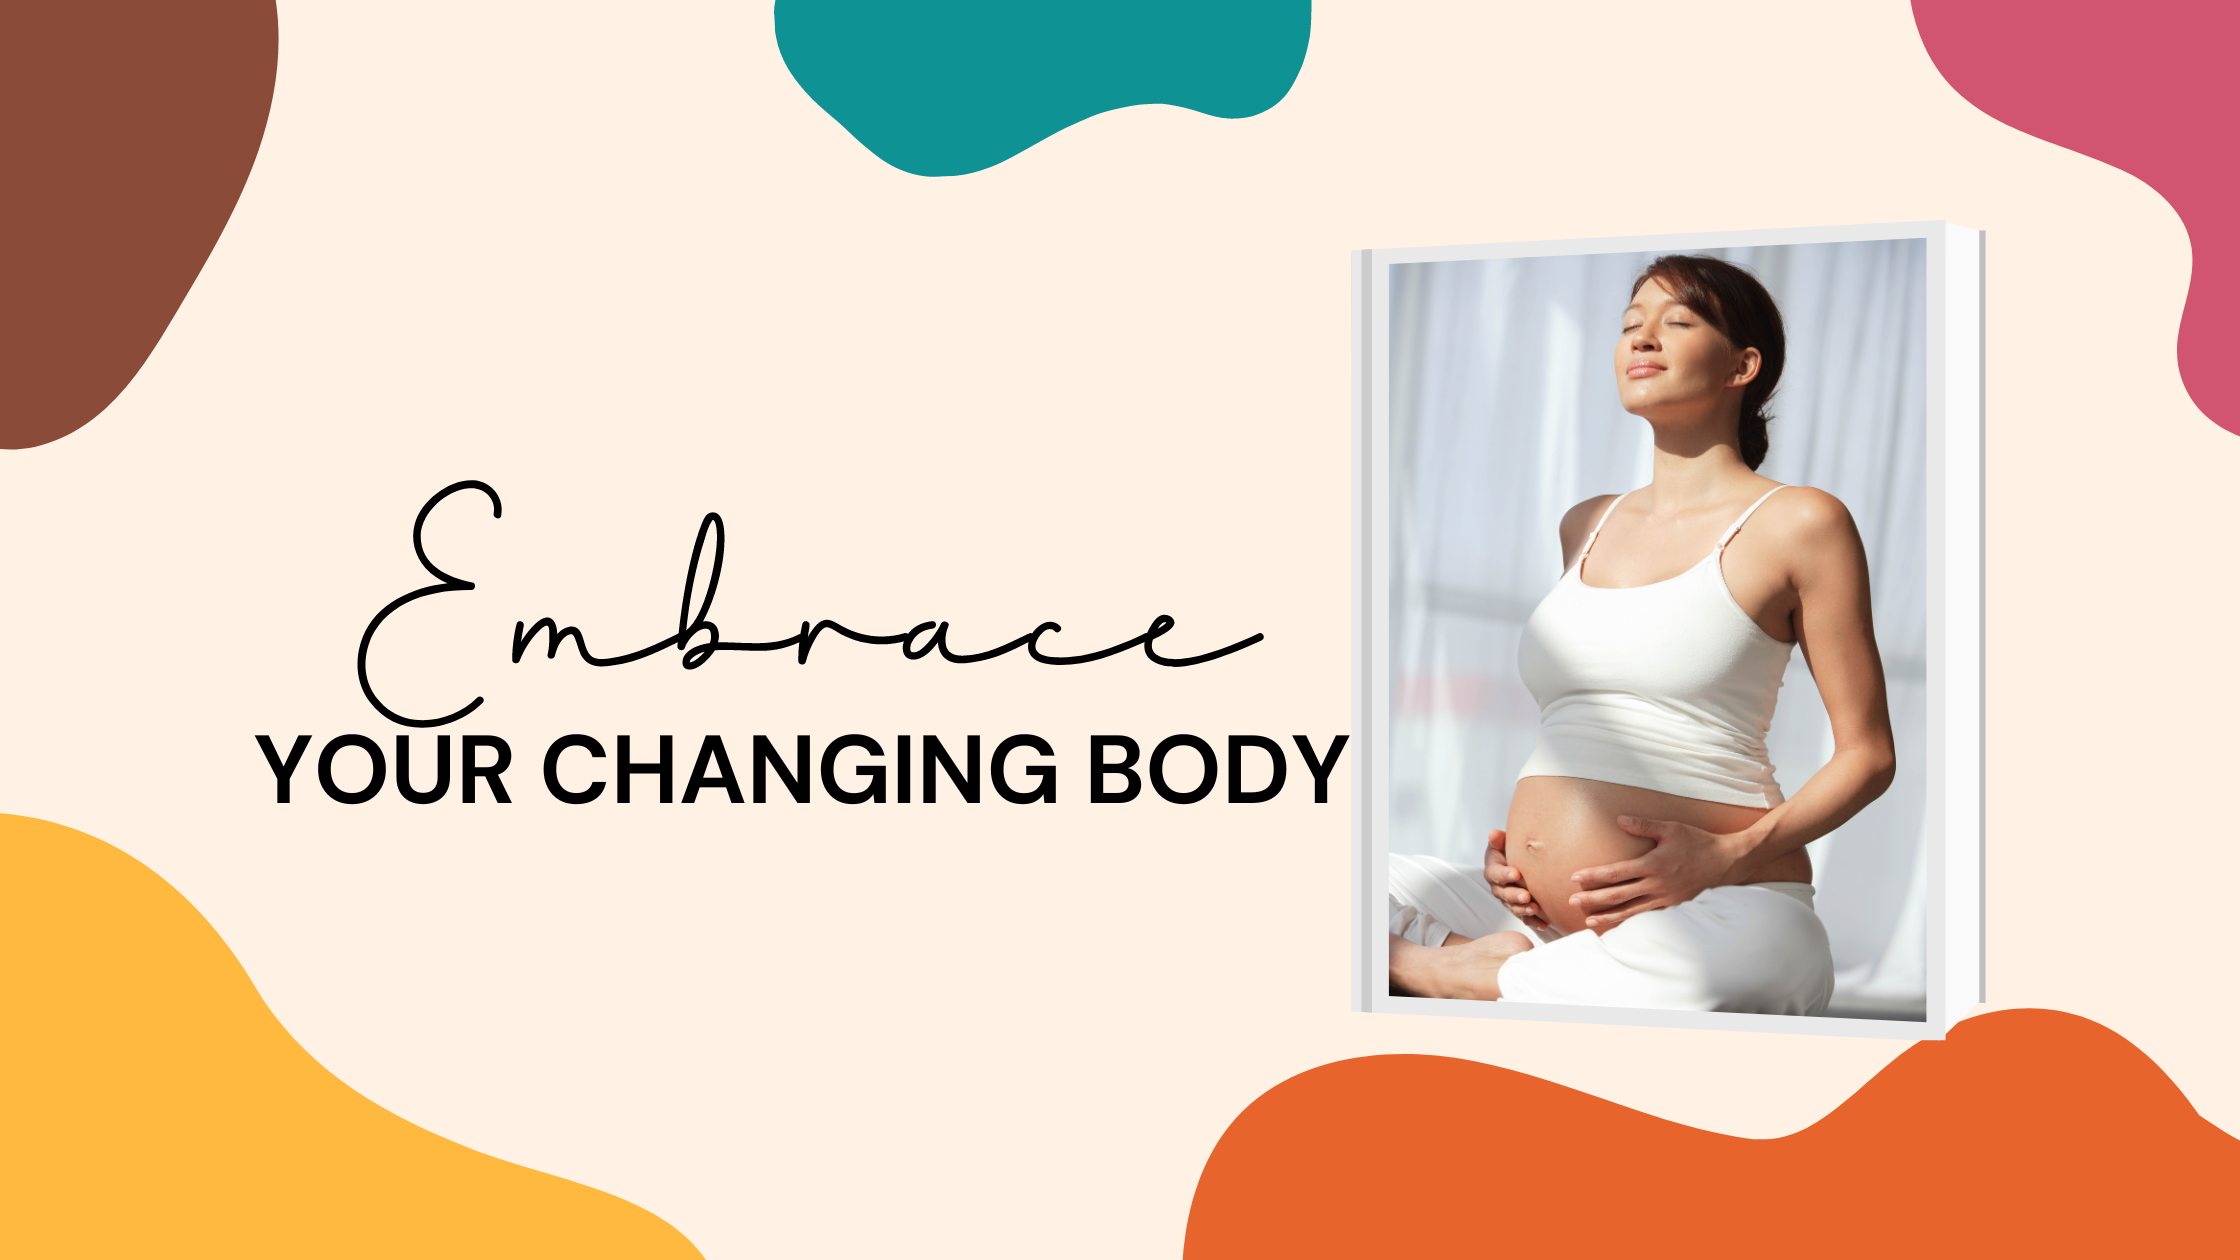 Embracing Your Changing Body